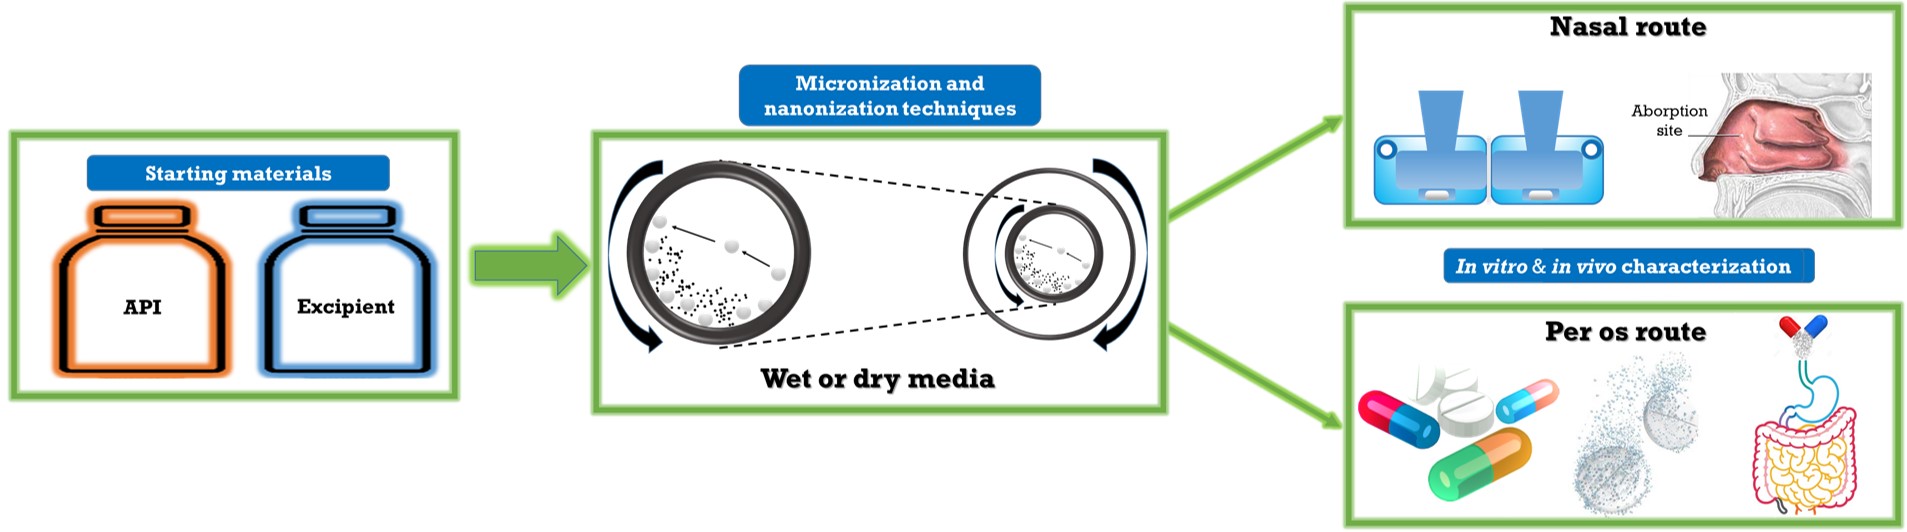 Application_of_Co-milling_procedures_in_wet_and_dry_media_for_particle_size_decreasing